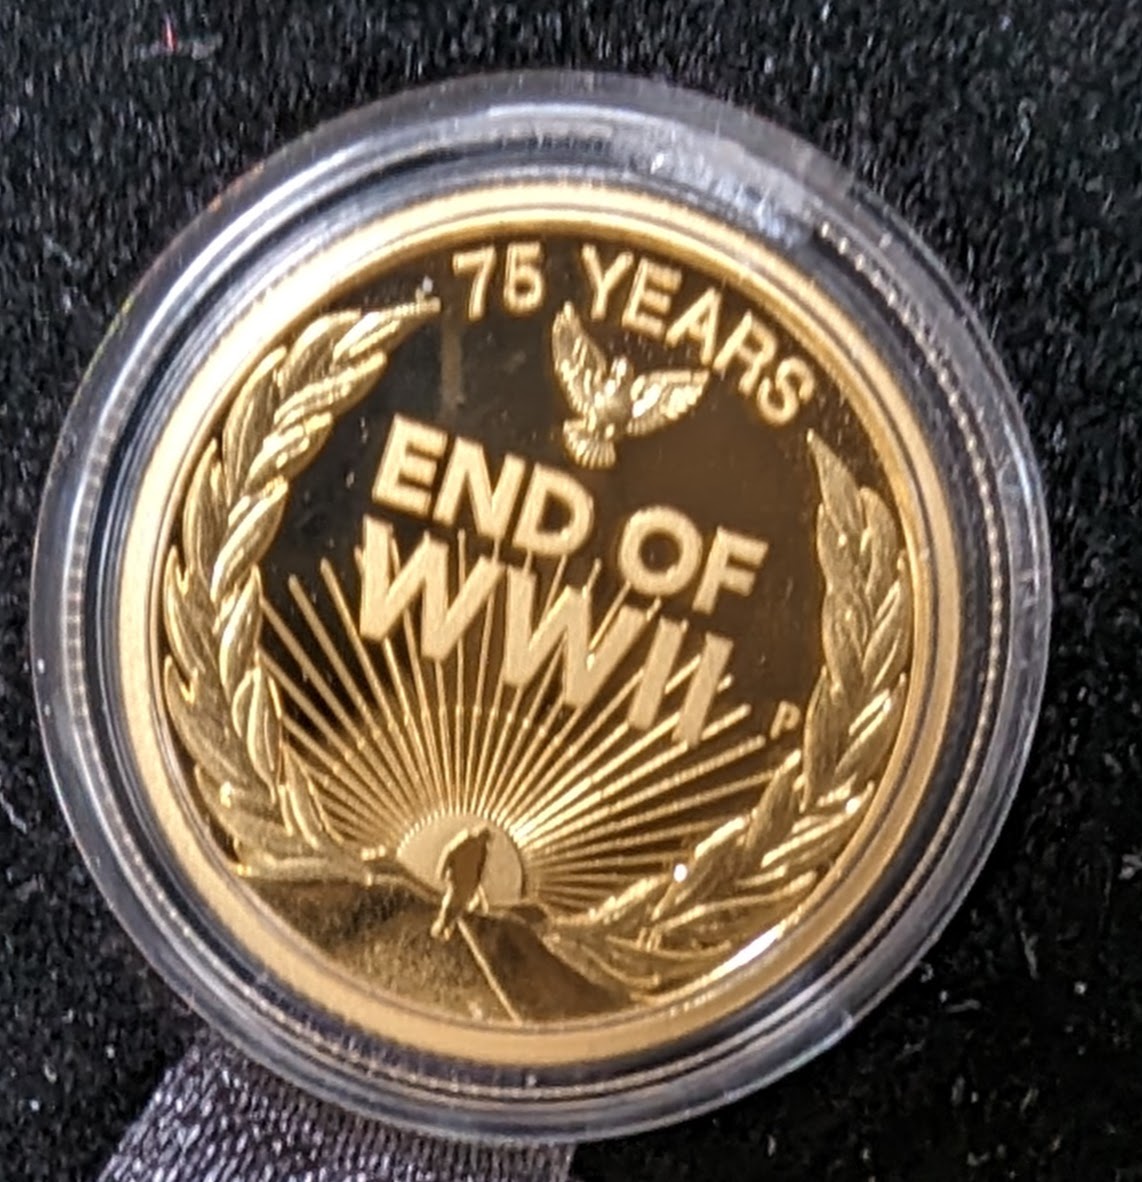 The Perth Mint 75th Anniversary of the End of WW2, 1/4oz Gold Proof Coin, with COA and original pack - Image 2 of 3